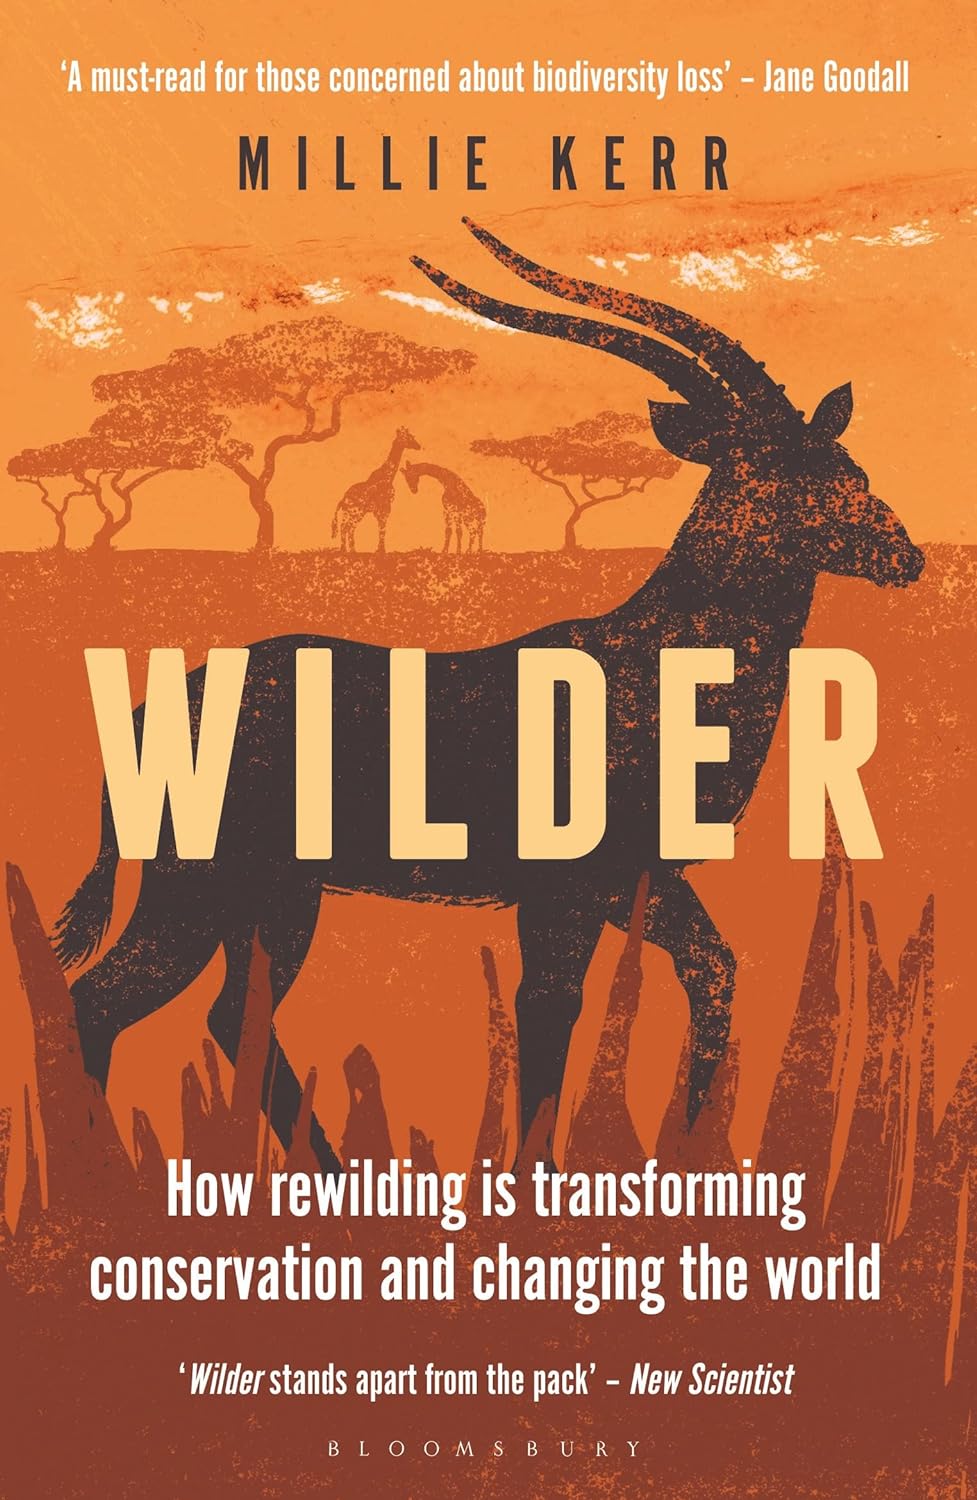 how rewilding is transforming conservation